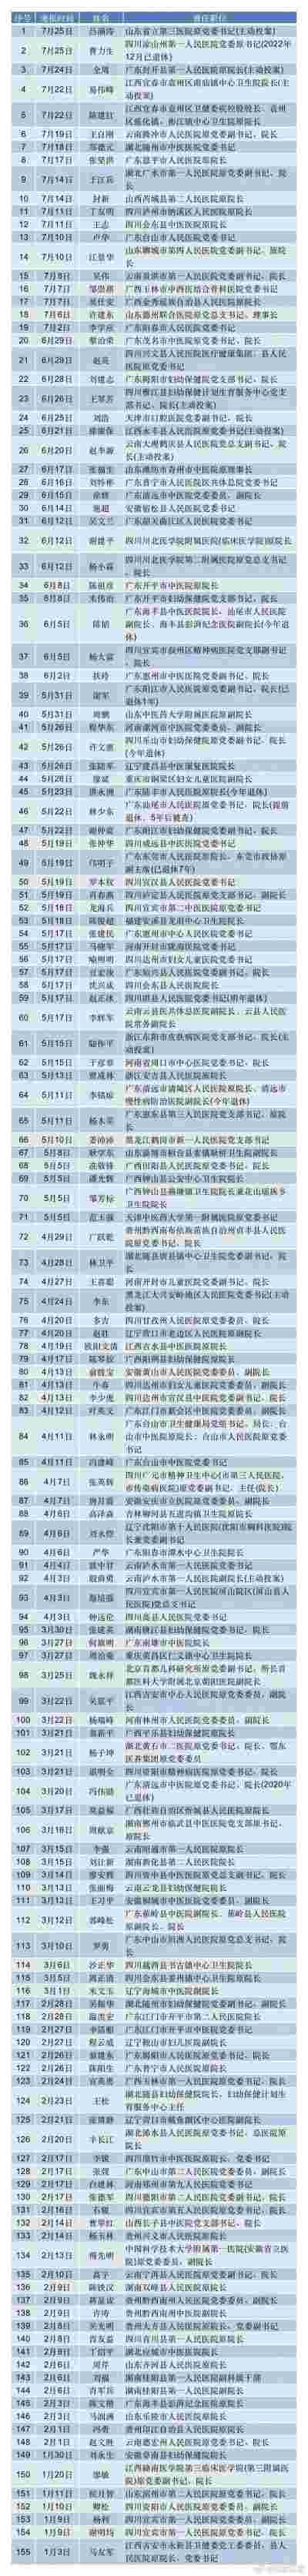 How big is the impact?, An anti-corruption storm is coming! Over 150 hospital deans and secretaries were investigated within the year by the Hubei Provincial Commission for Discipline Inspection | Medical | Secretary